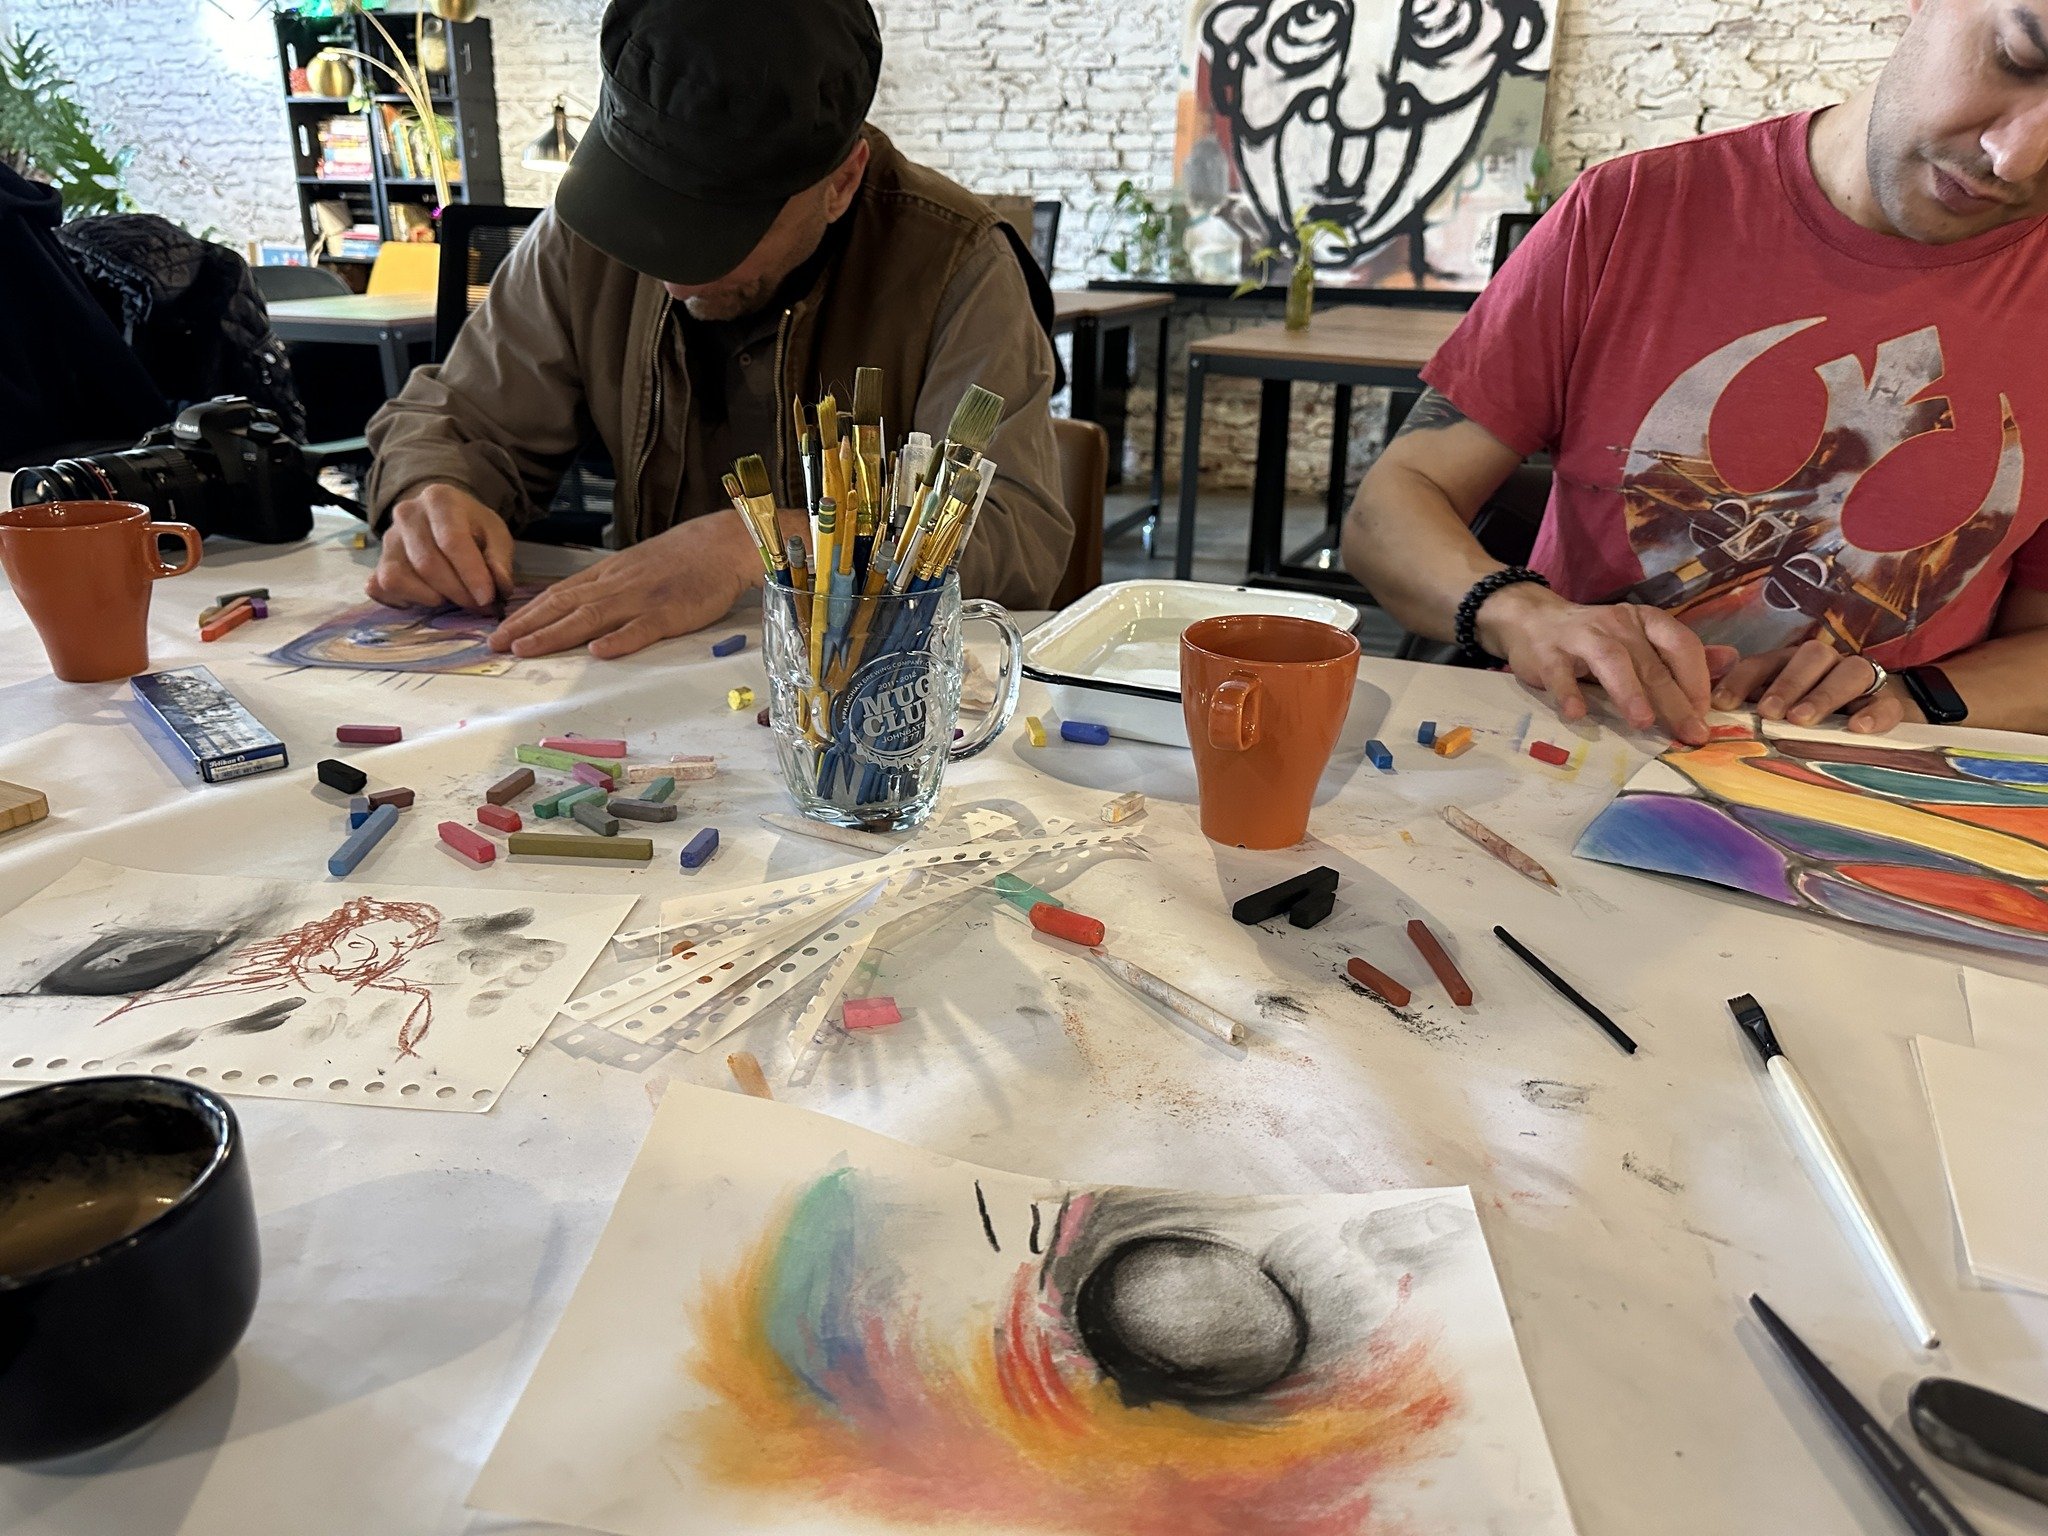 Creativity needs a light heart. It's all about  P L A Y !!! This month at Creative Release Open Studio Saturdays we are playing with soft pastels and charcoal. Come and hang. No worries if pastels are not your thing. Feel free to bring anything you'd